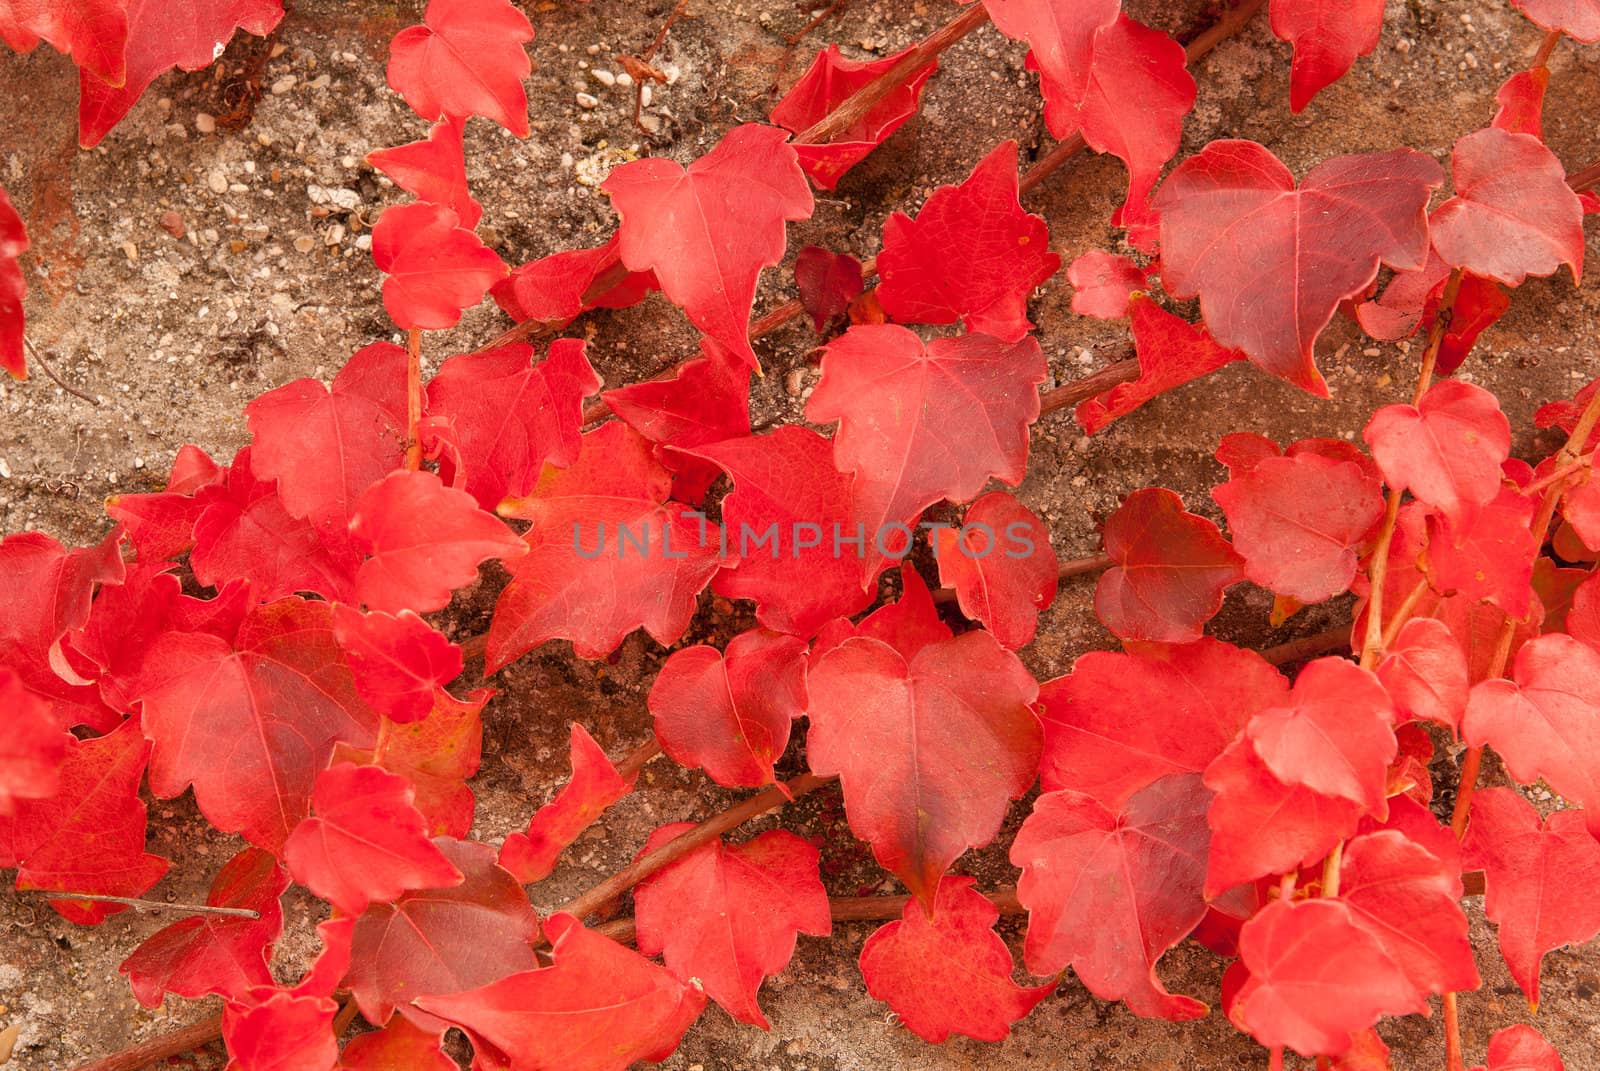 The old wall covered with scarlet red leaves is closeup for the texture